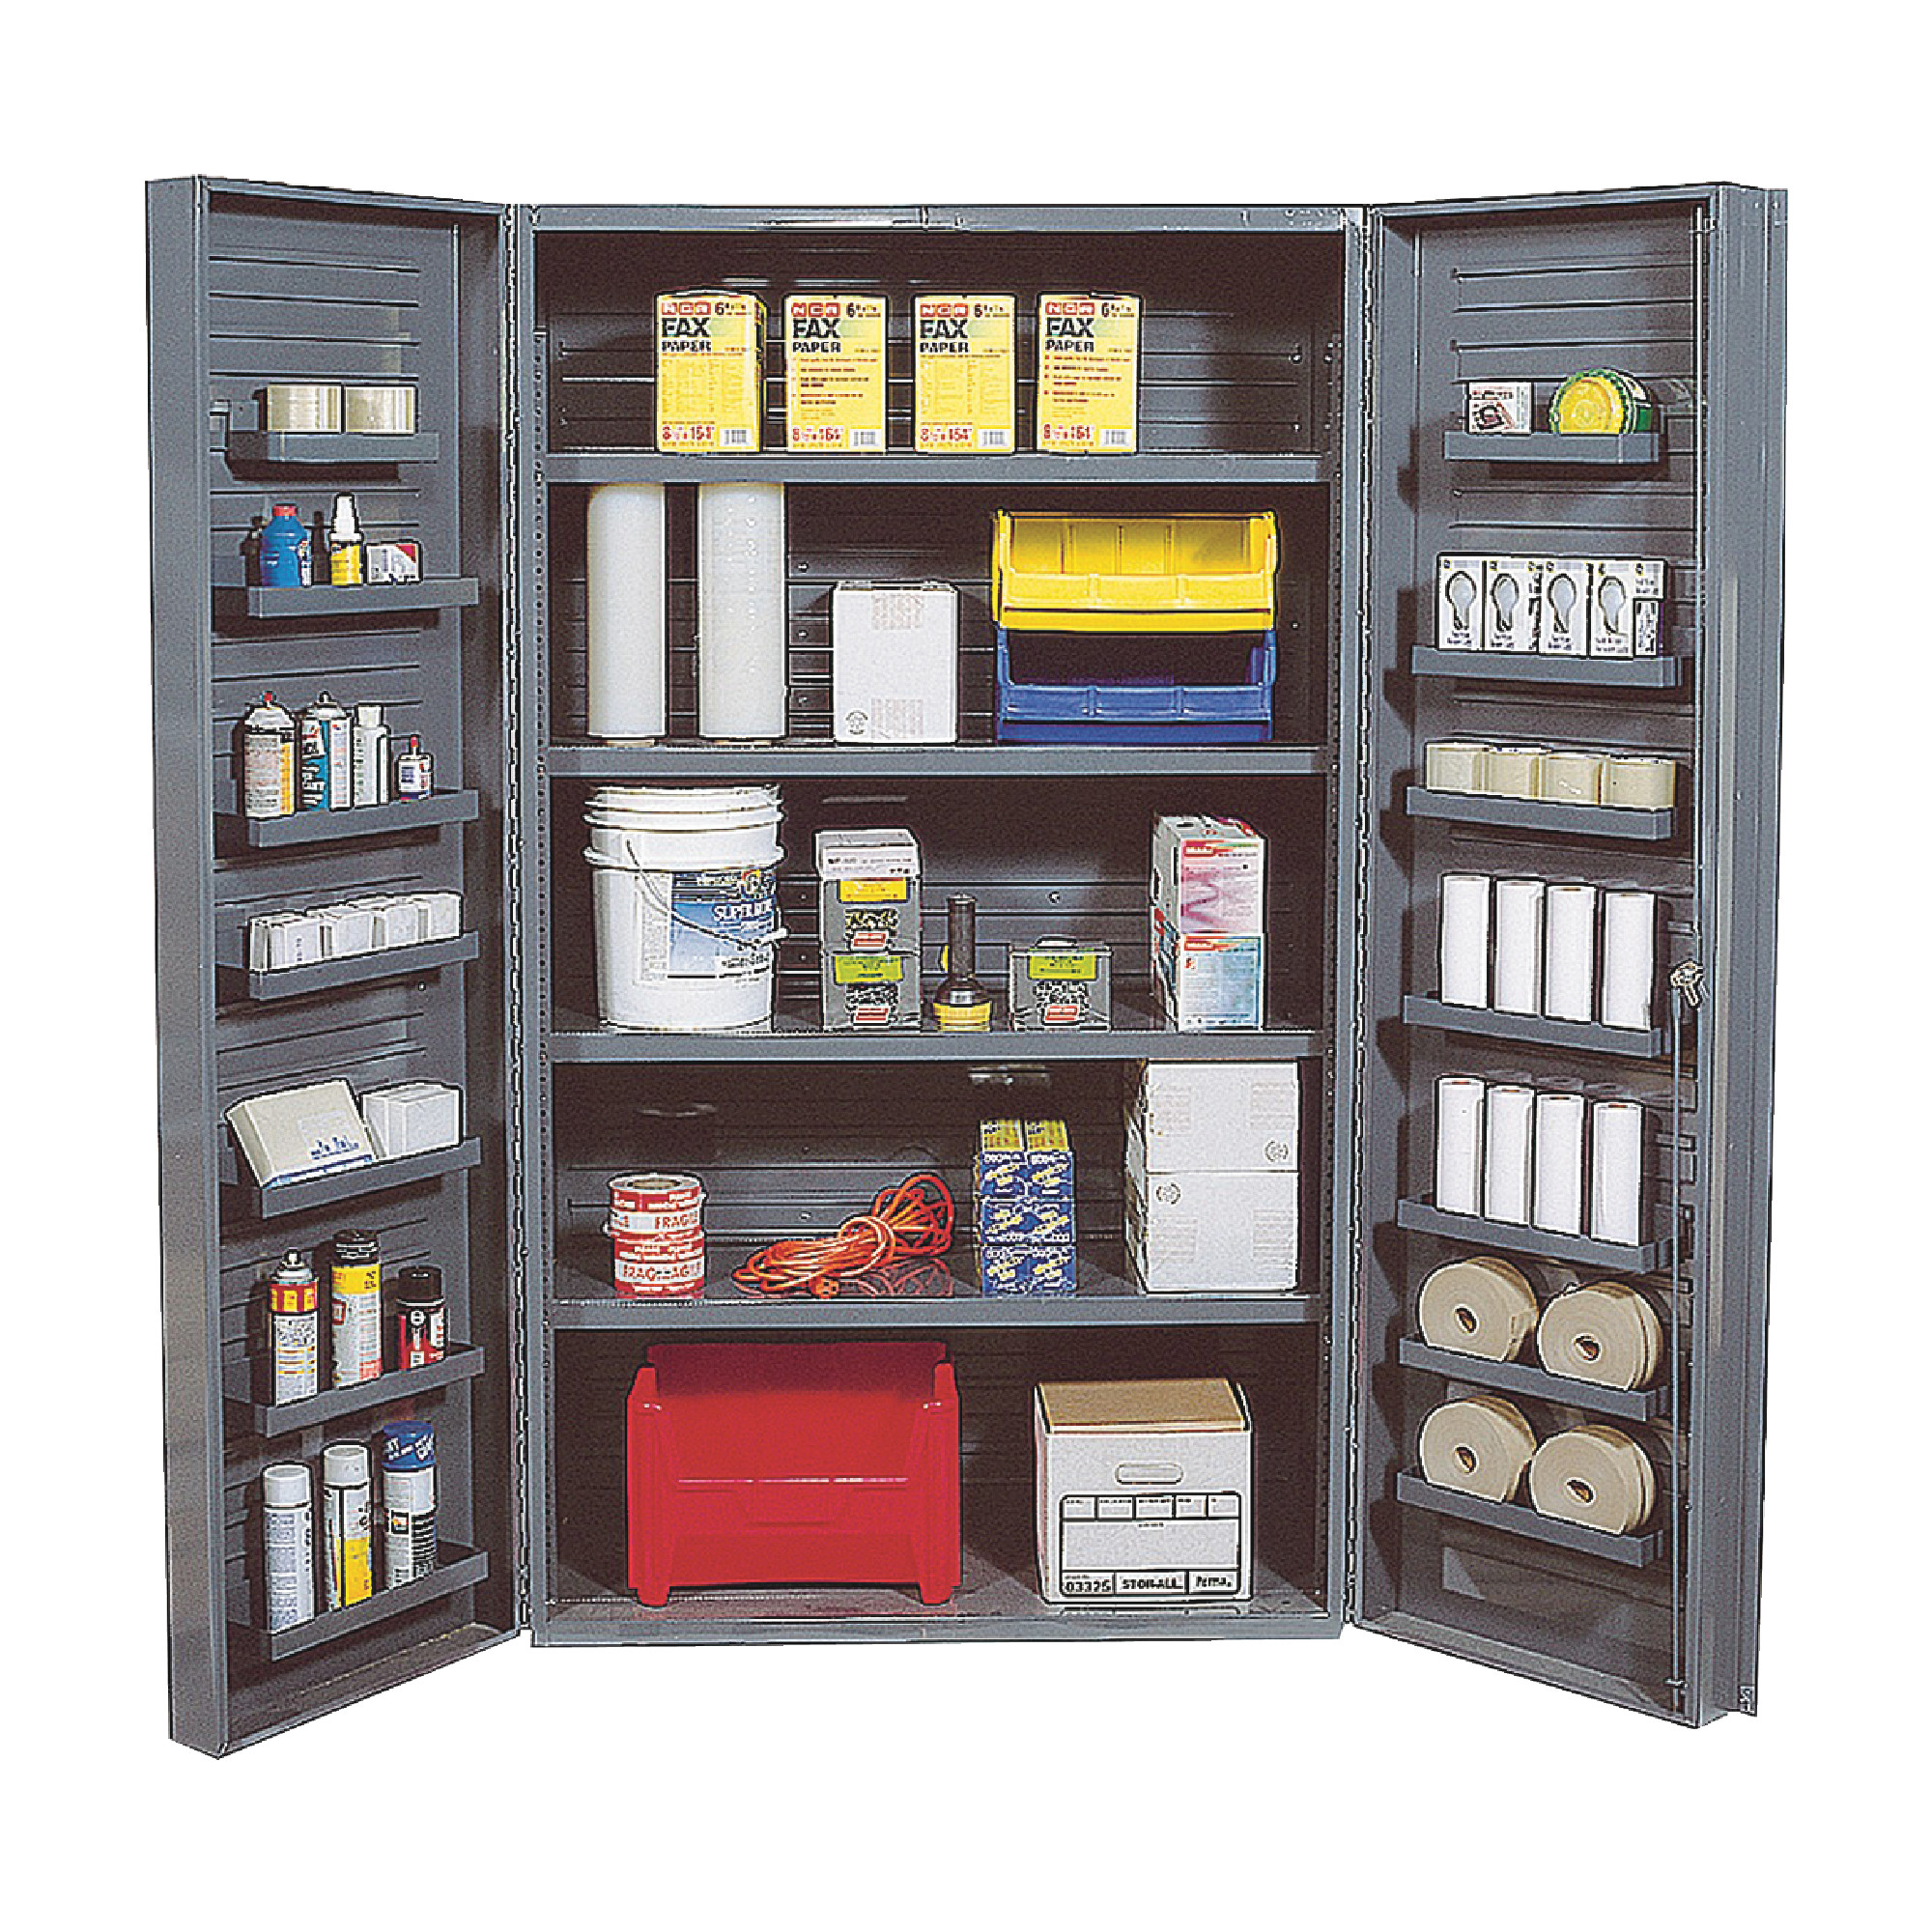 QUANTUM STORAGE SYSTEMS 48" Wide All Welded Floor Cabinet With 18 Shelves